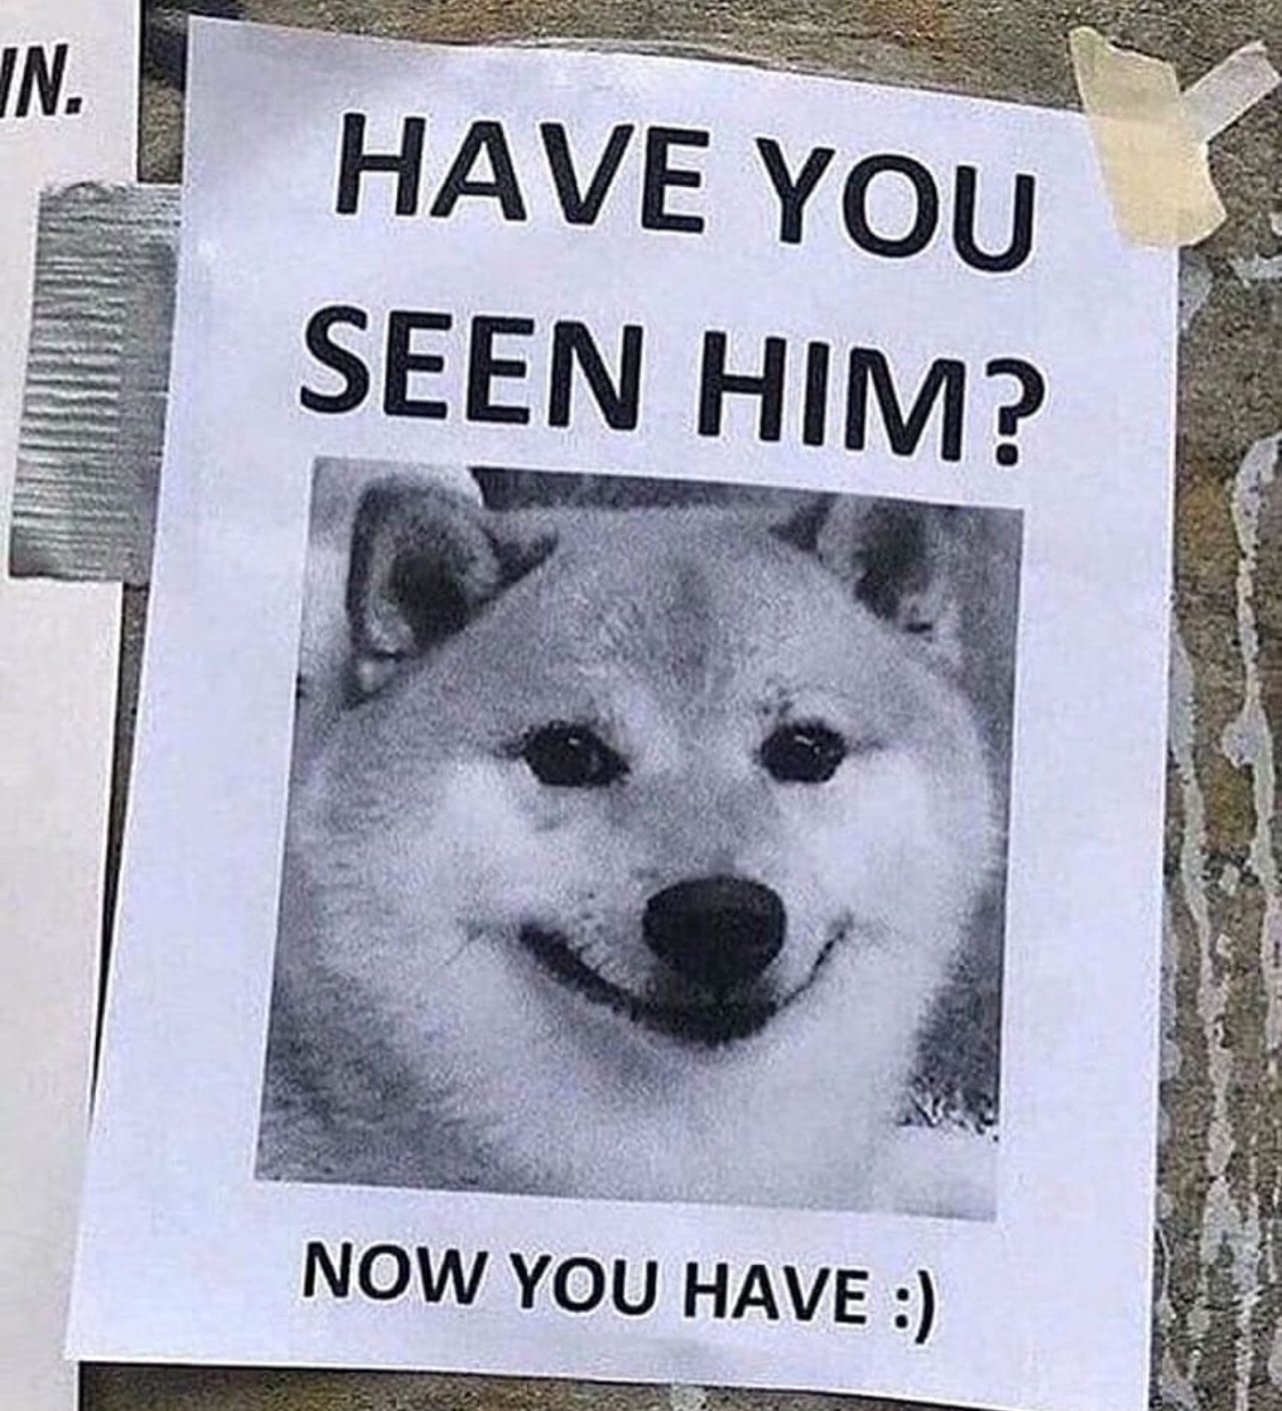 shobe meme - In. Have You Seen Him? Now You Have